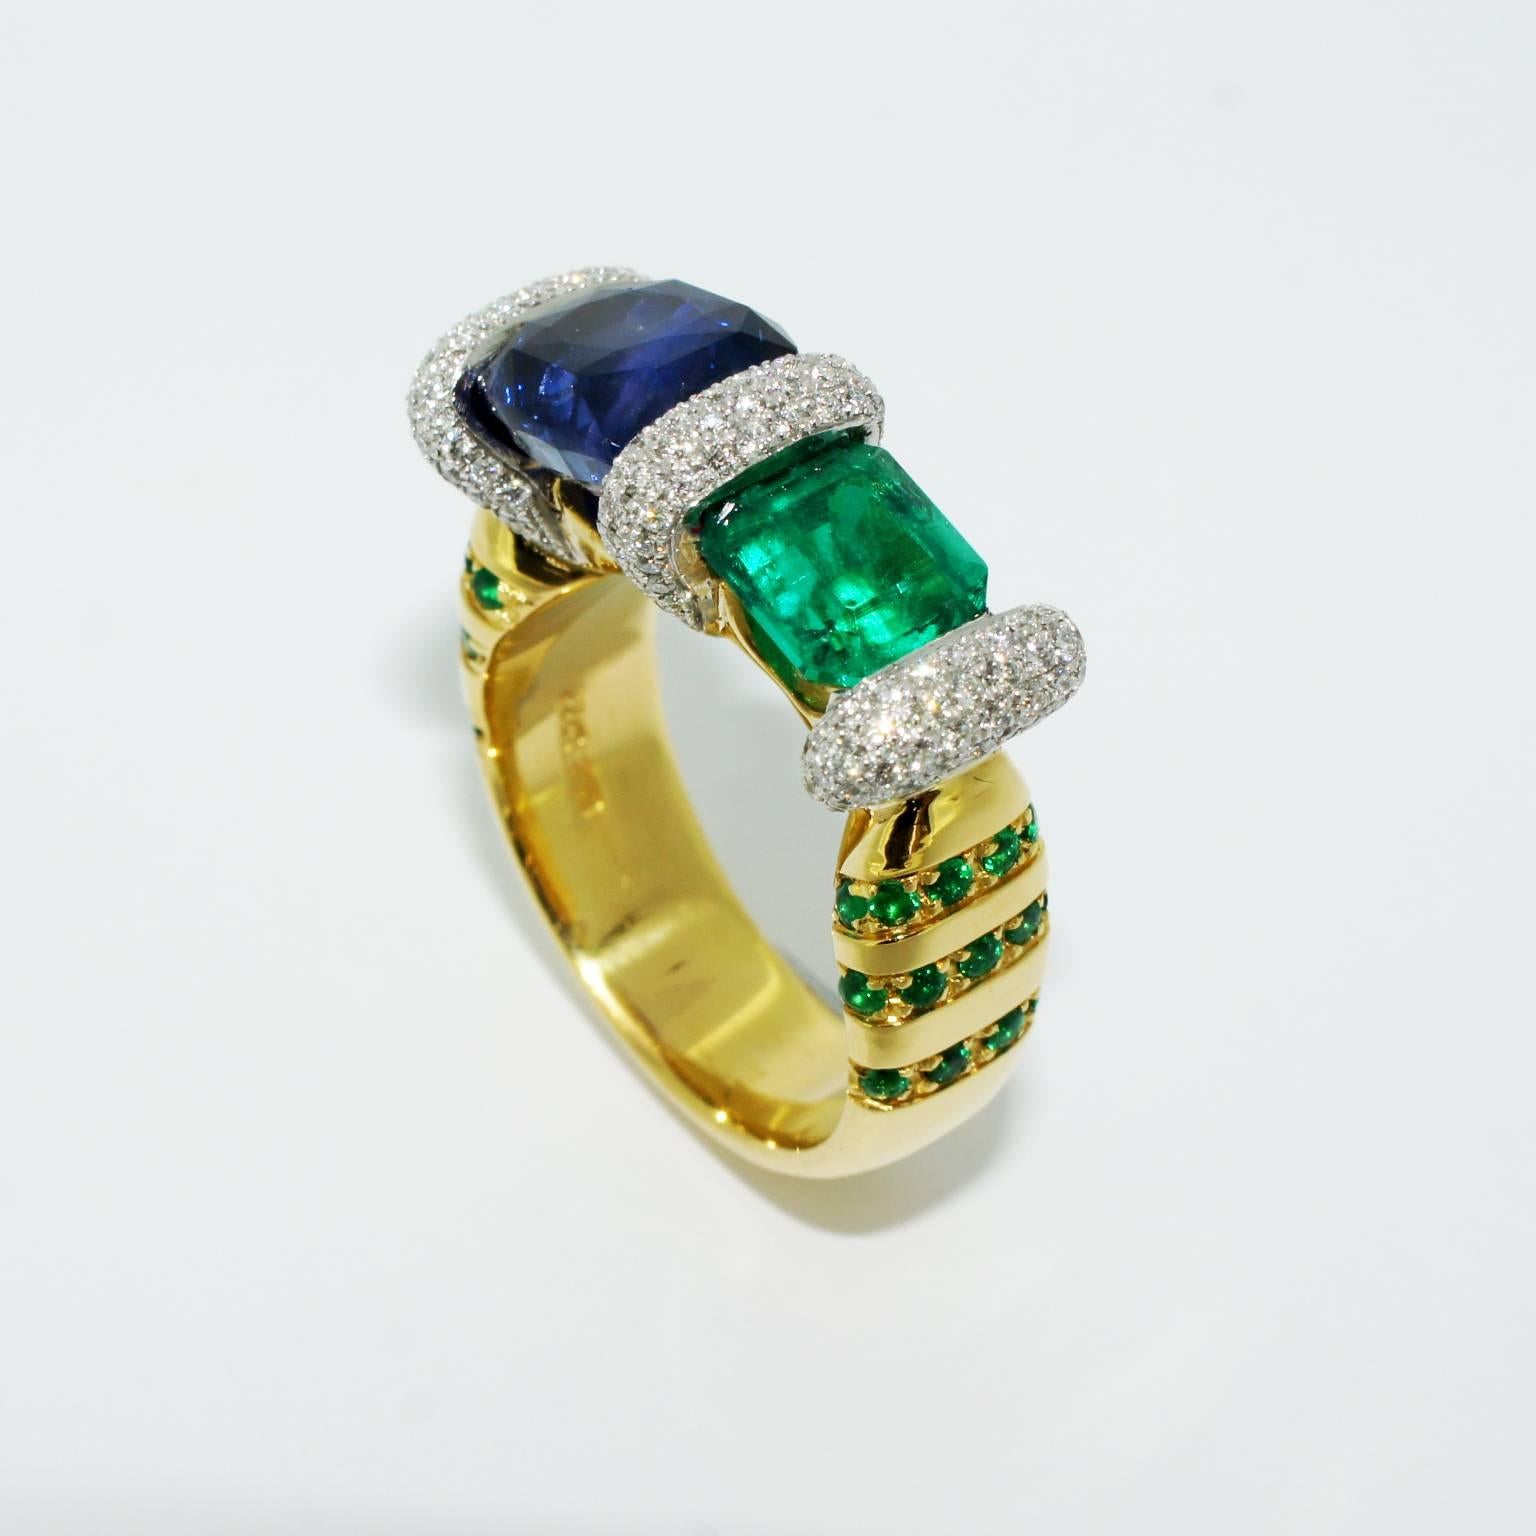 Lizunova Handmade Sapphire, Emerald & Diamond Ring in 18k yellow & white gold In New Condition For Sale In Sydney, NSW